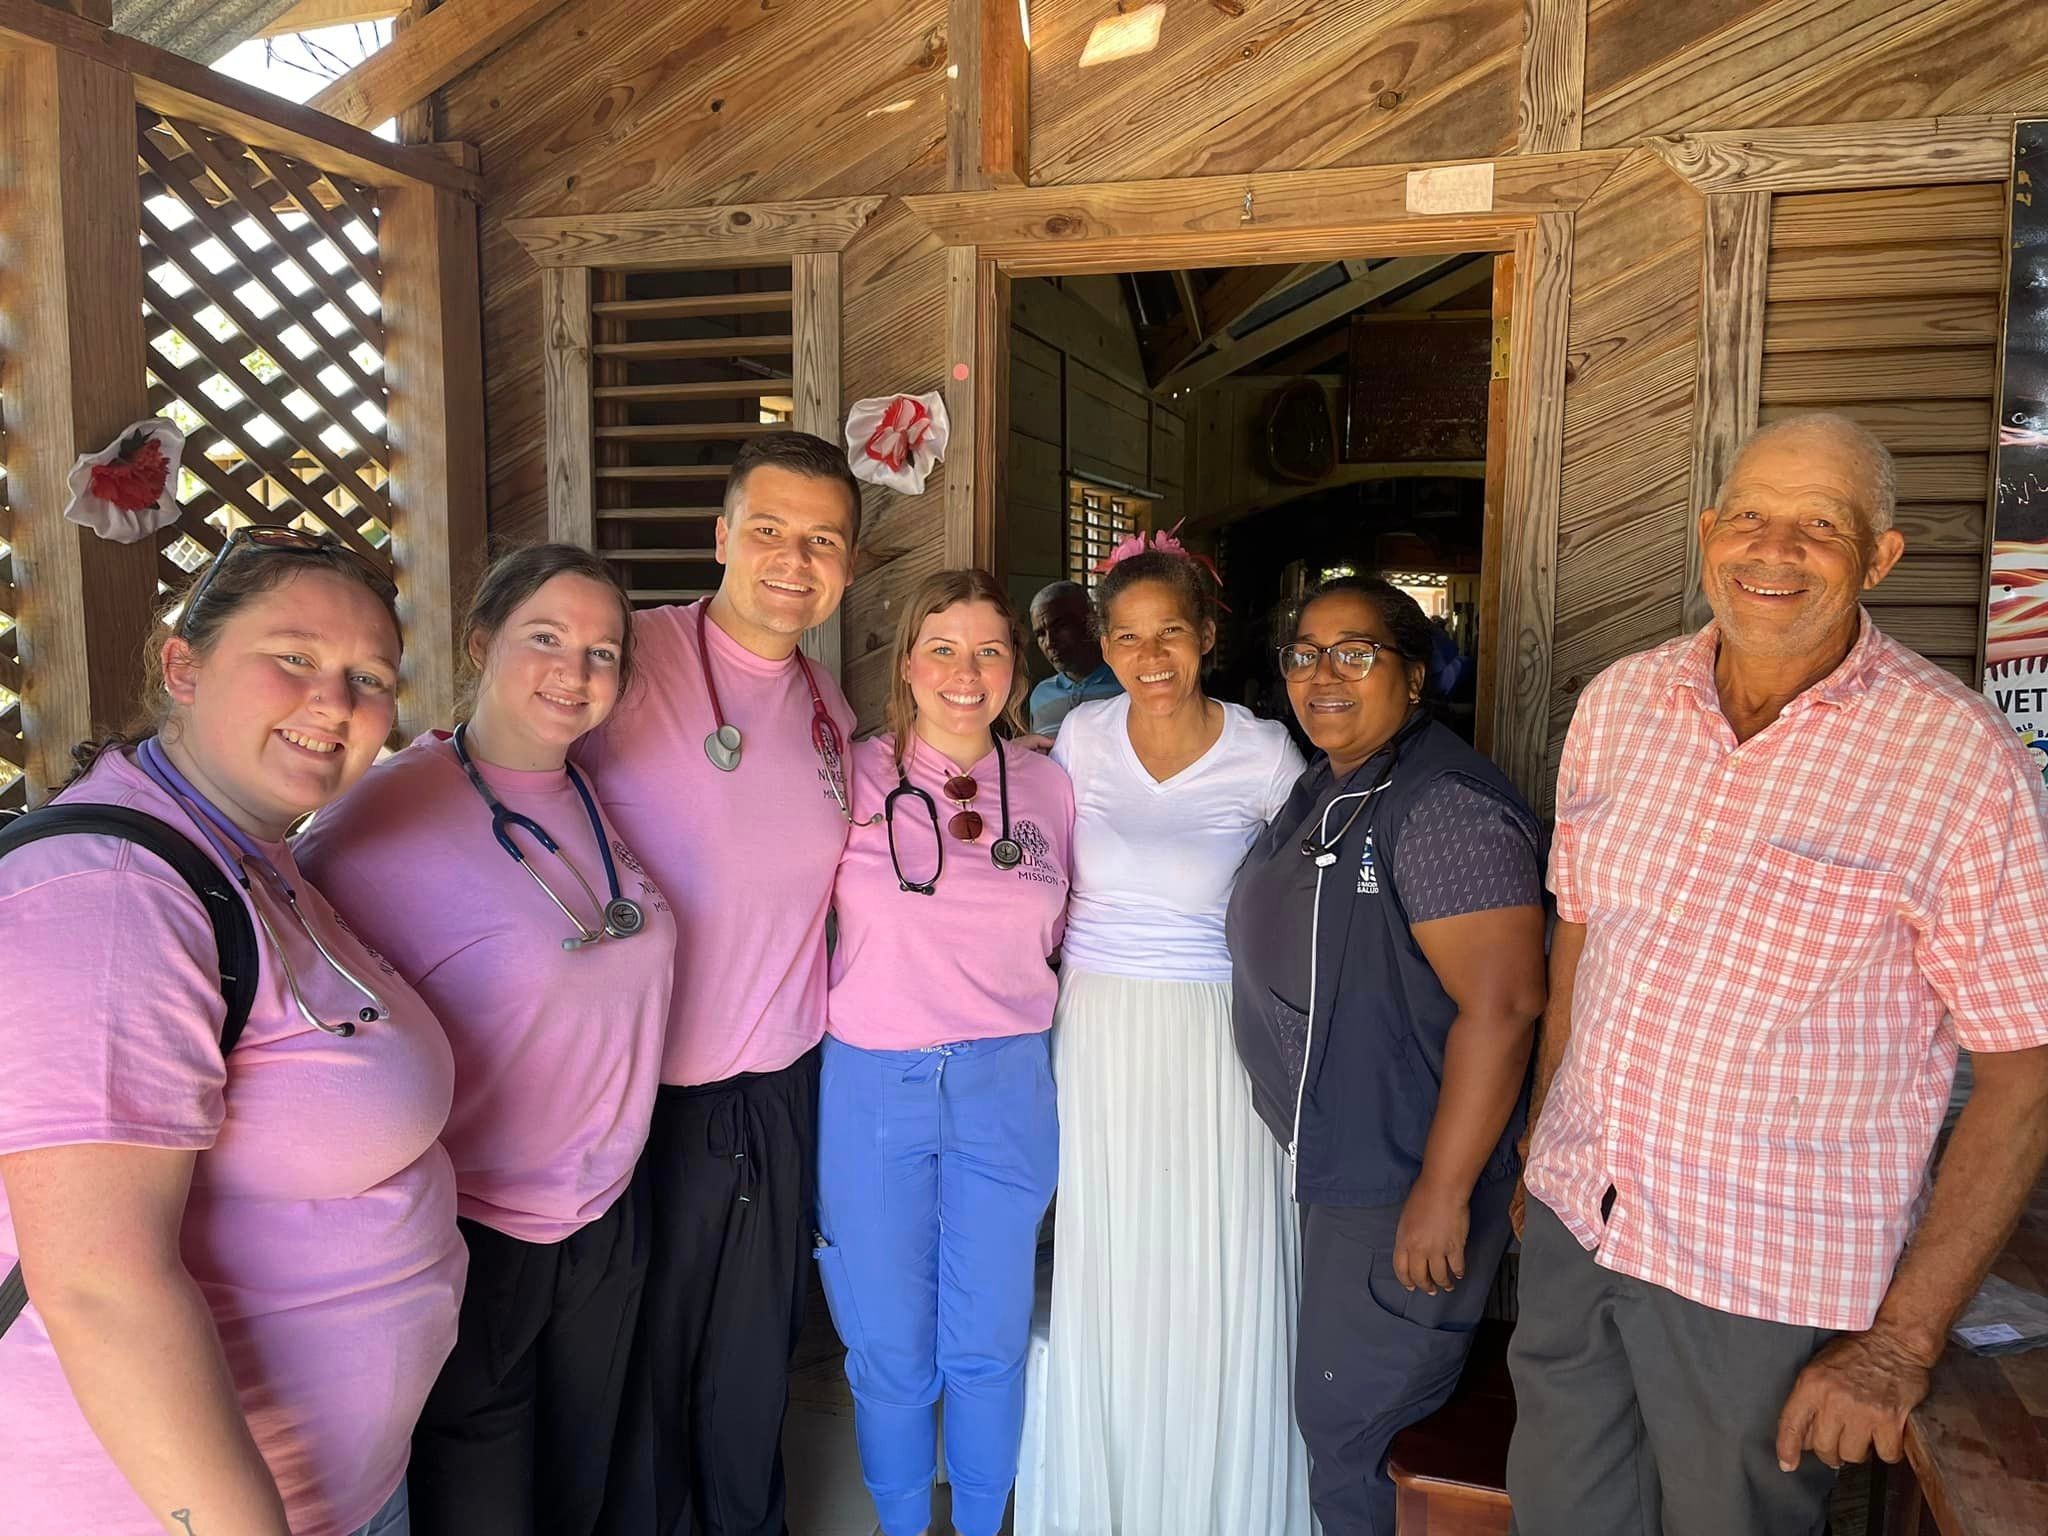 VU Nursing students, faculty and alumni volunteering during a medical mission trip to the Dominican Republic